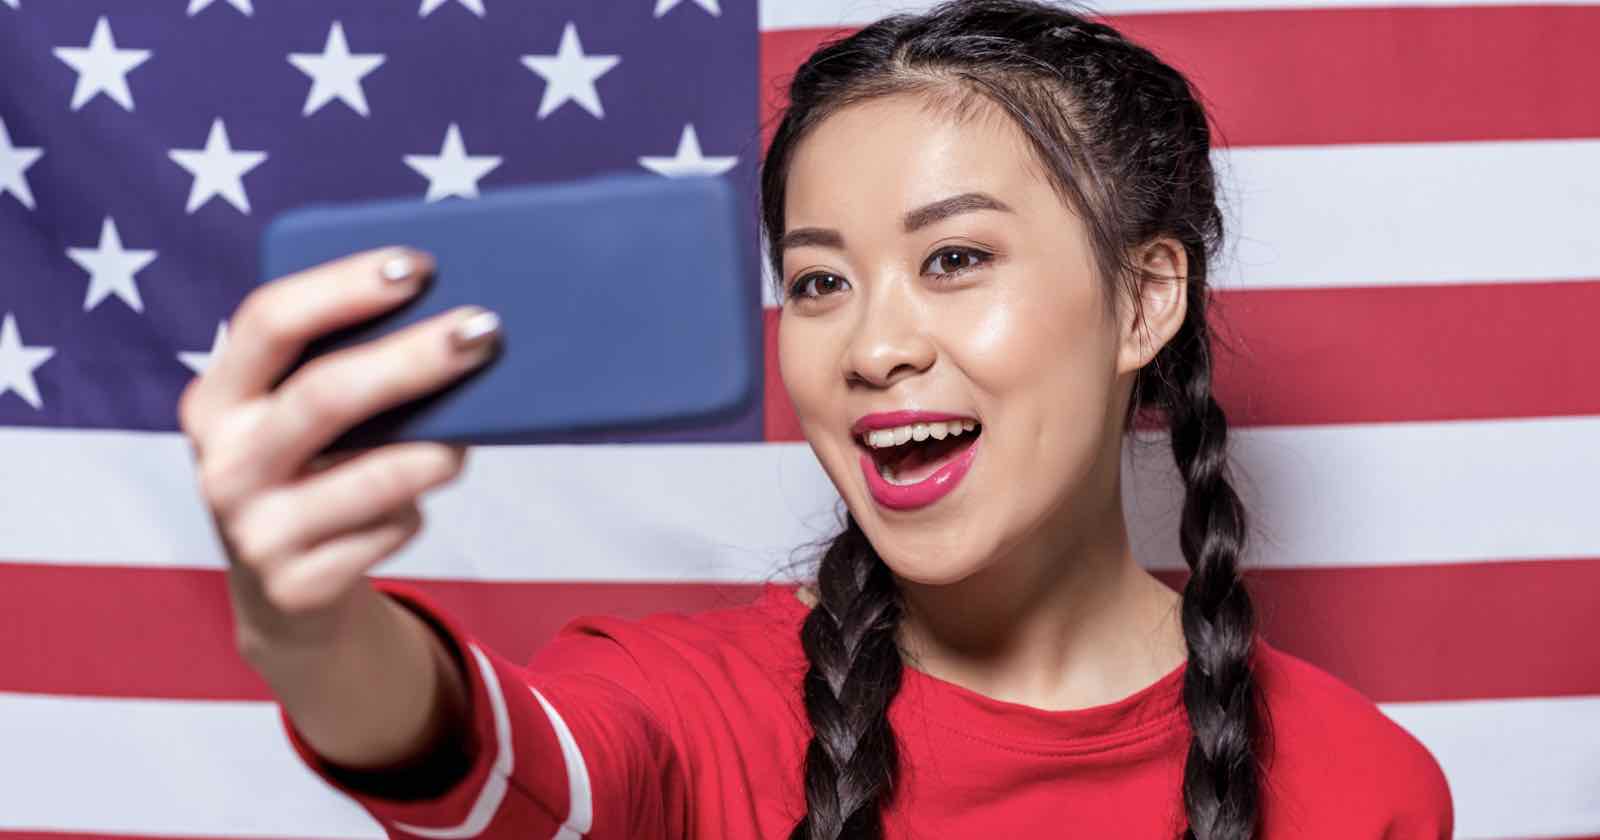 Study Reveals The ‘Most Selfie-Obsessed States’ in The US